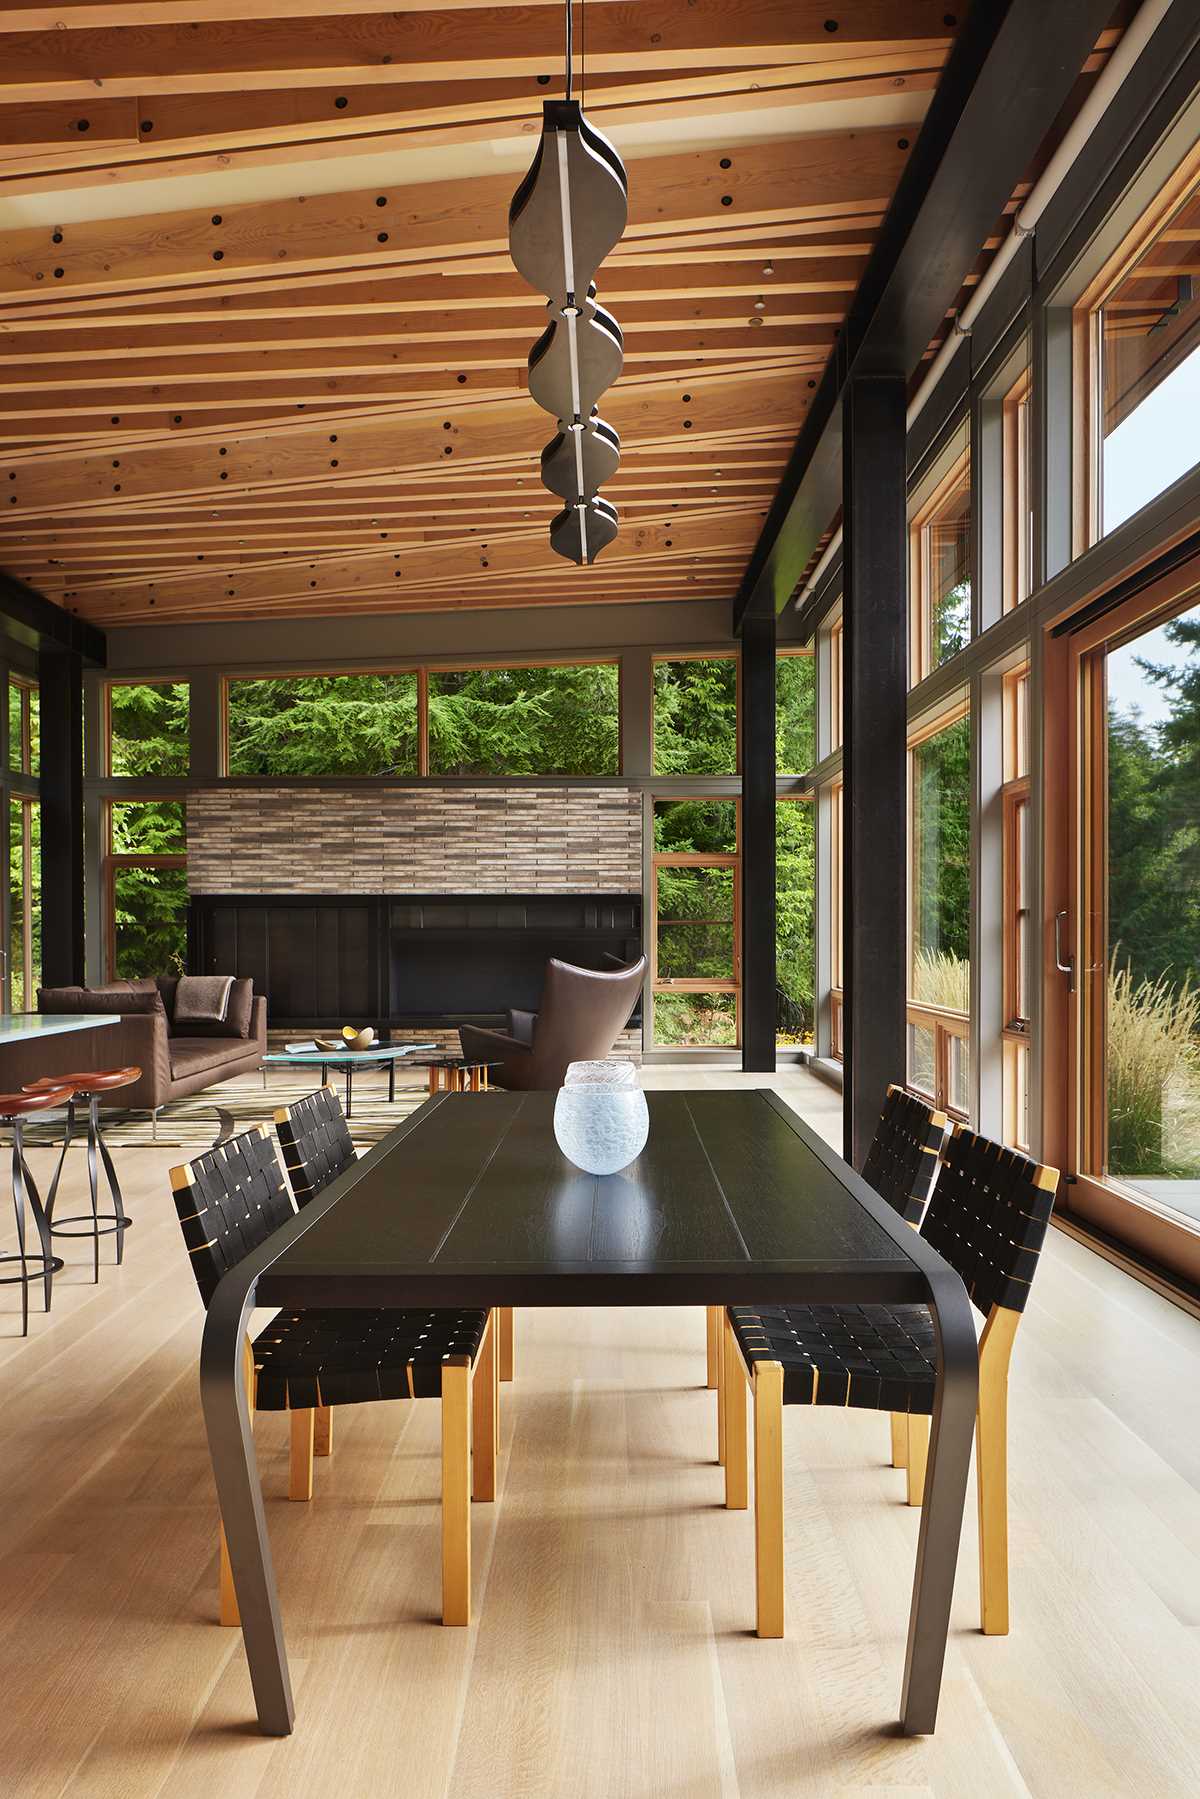 The dining table is placed across from the kitchen, with large sliding glass doors opening to a raised terrace overlooking the meadow. Custom lighting is also featured throughout the interior, like above the dining table, and in the kitchen.